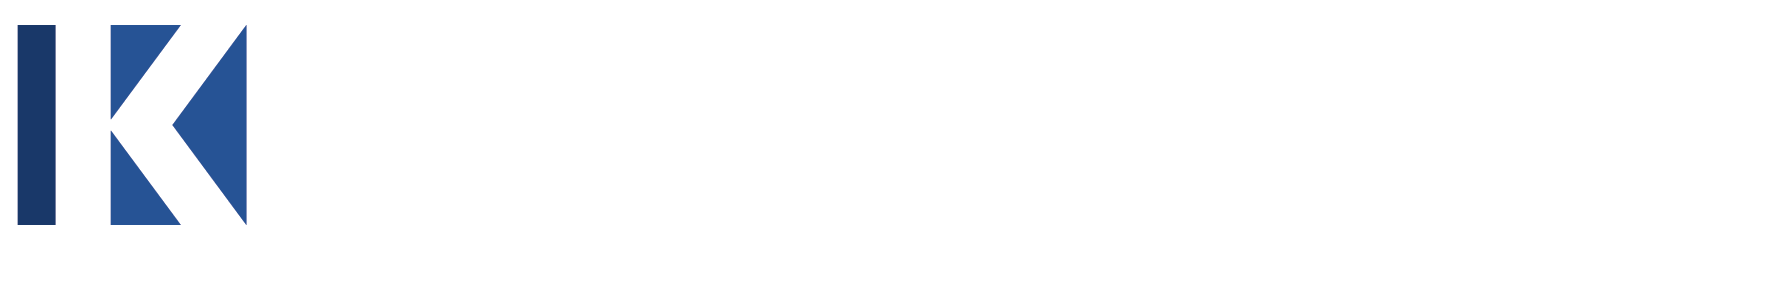 The Kase Group